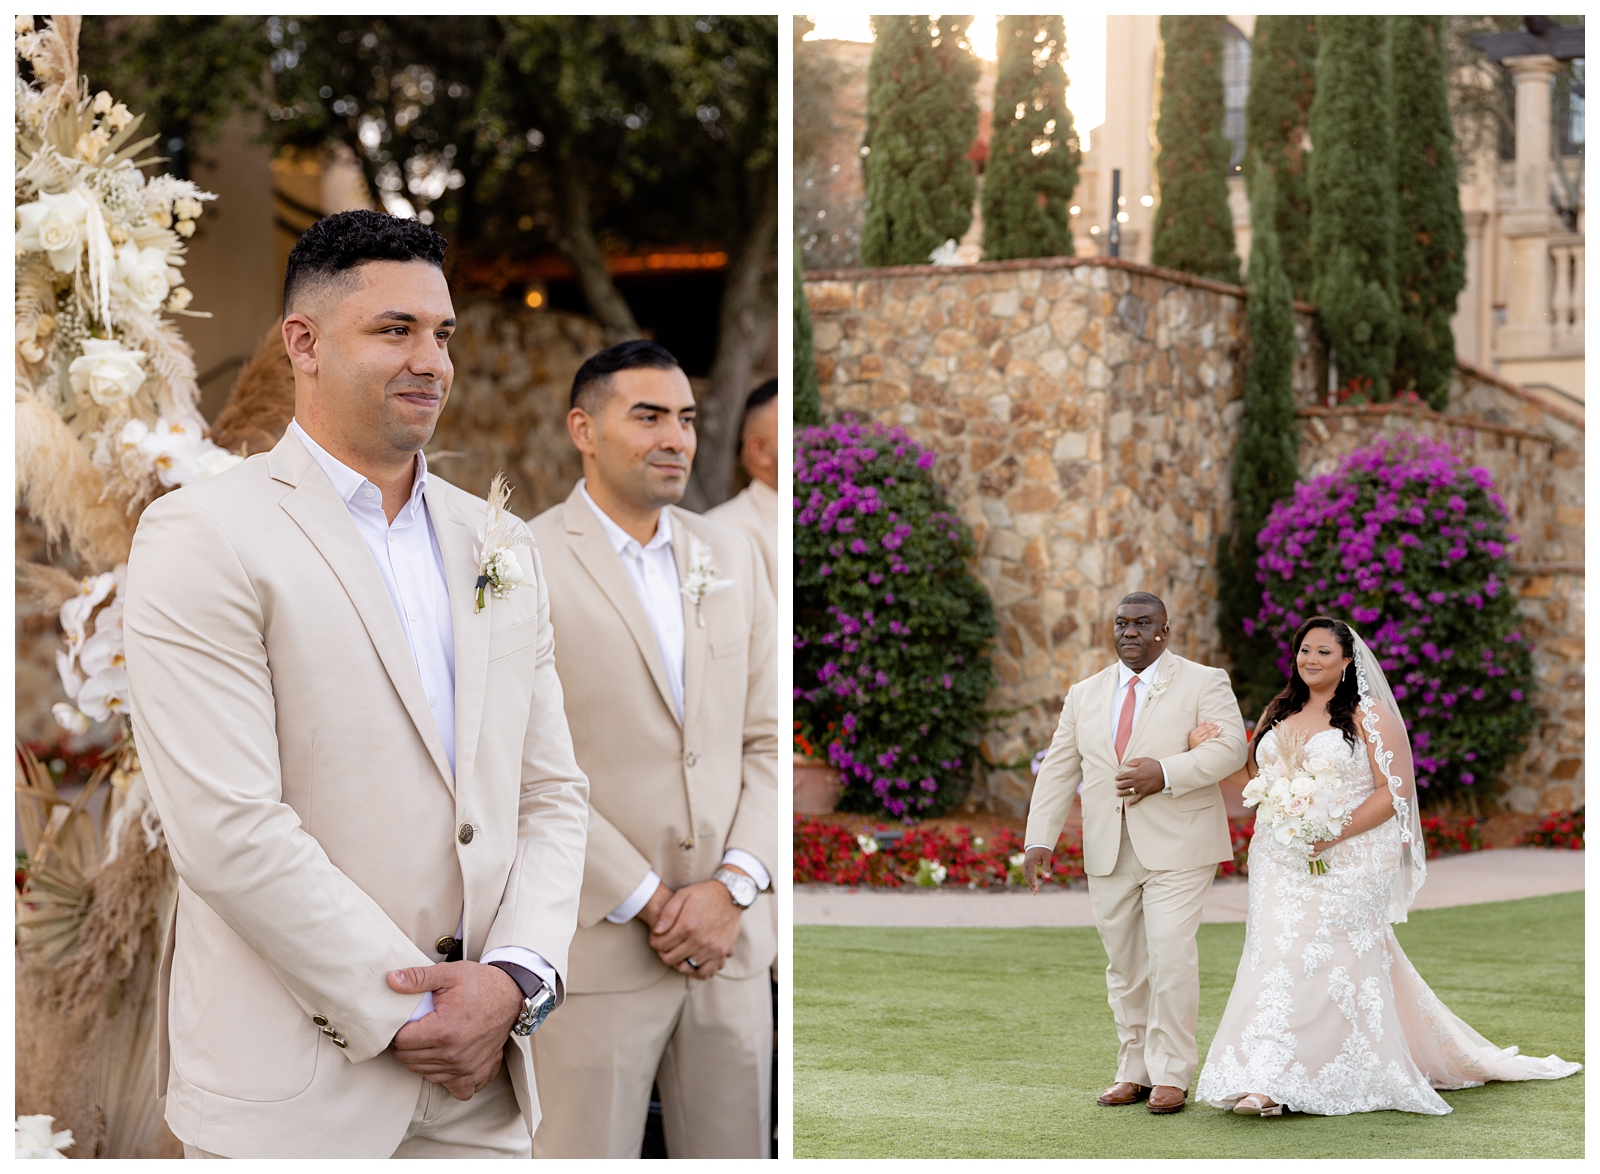 Outdoor Ceremony at The Grand Lawn at Bella Collina